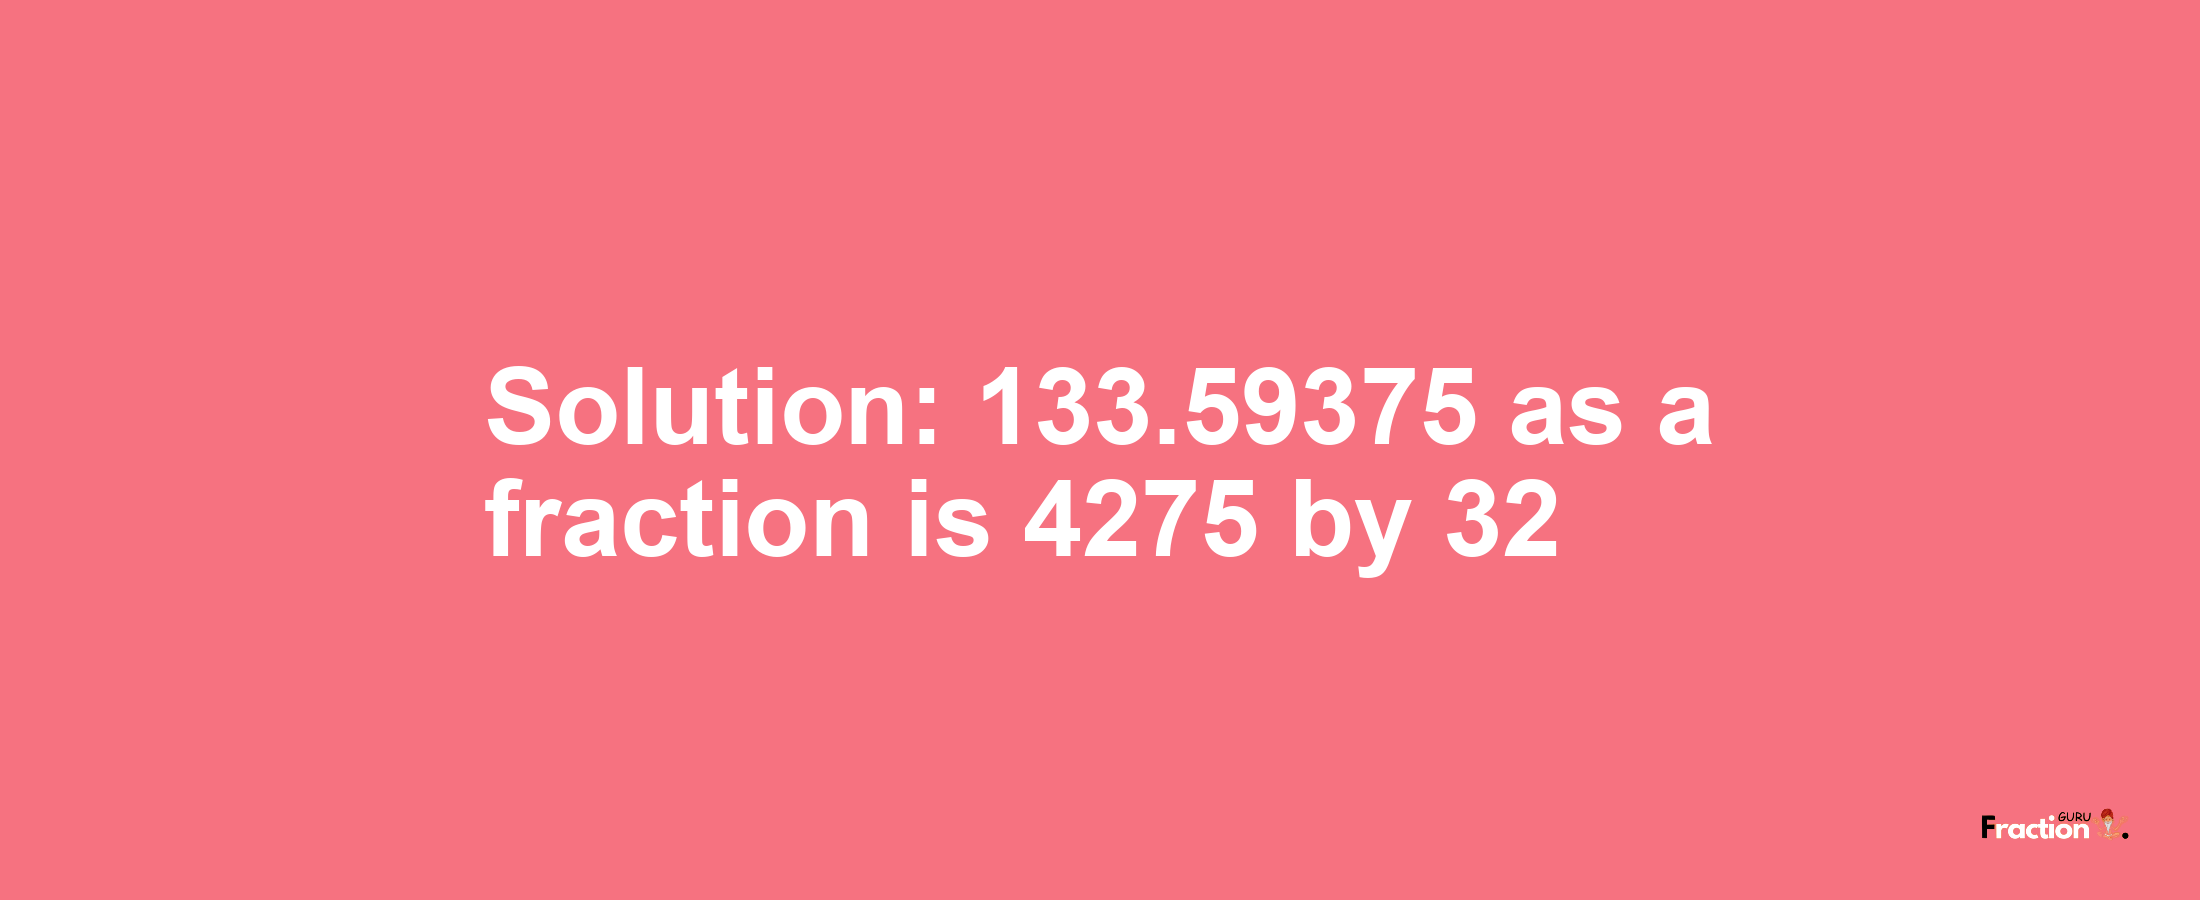 Solution:133.59375 as a fraction is 4275/32